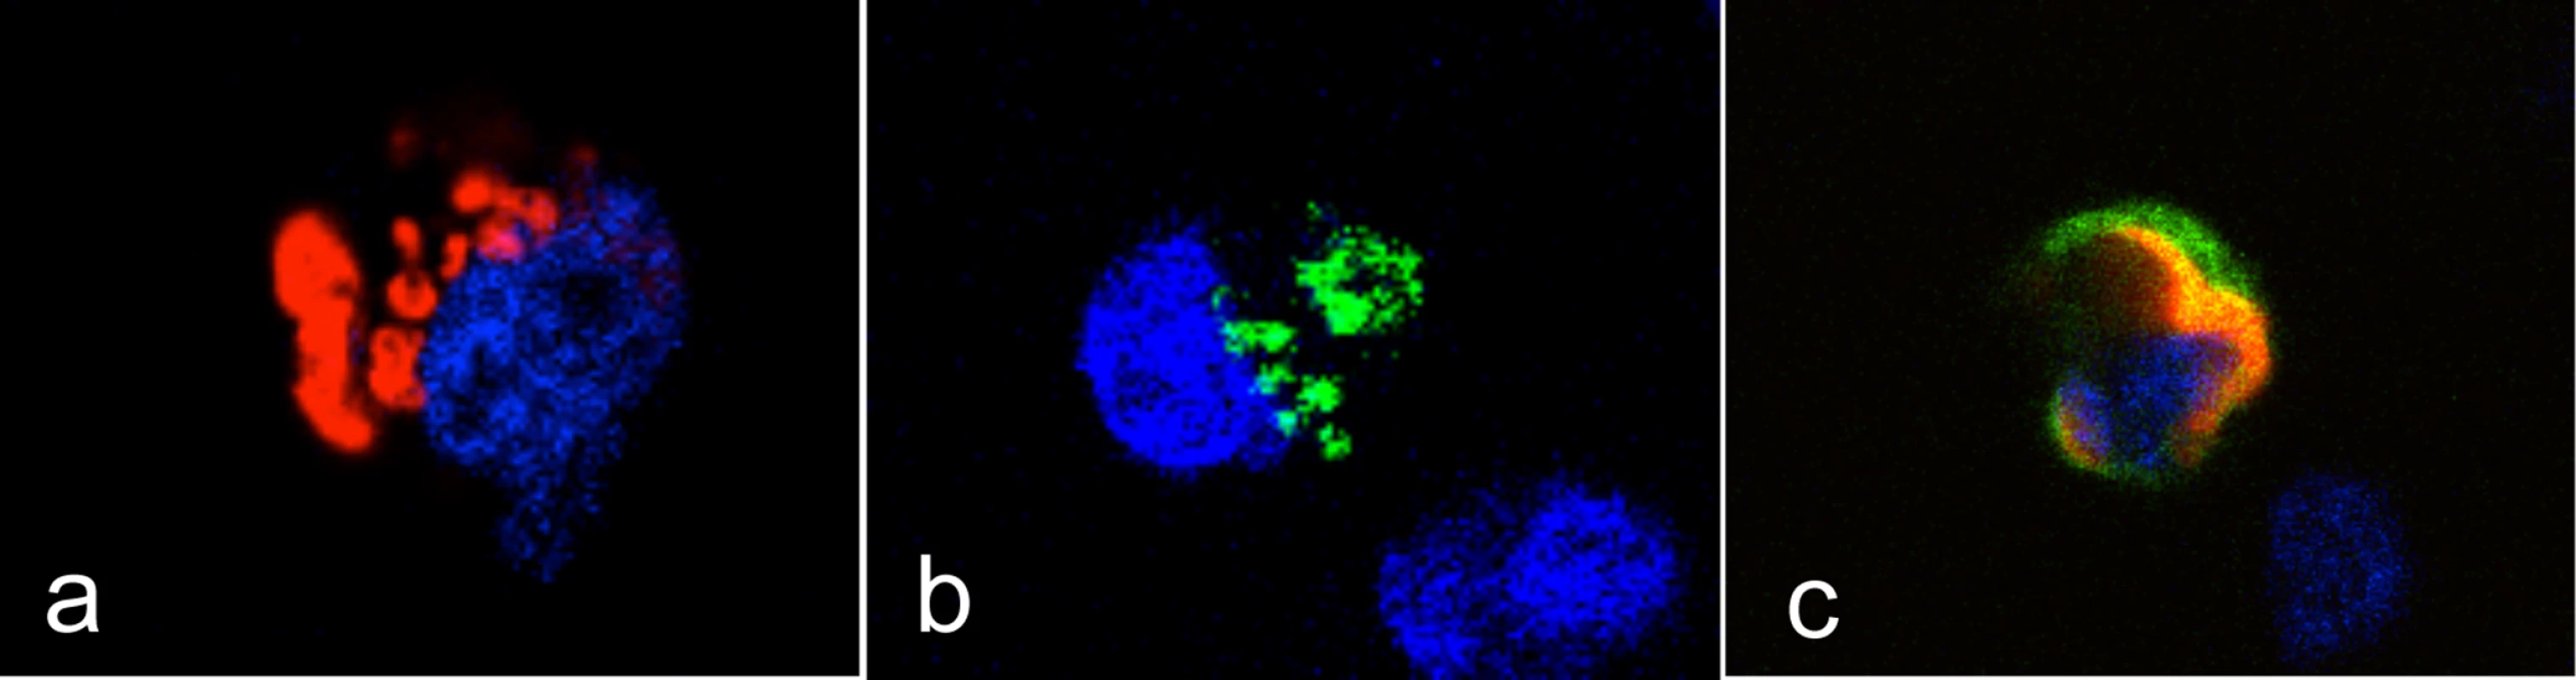 Intracellular localization of the rFut1 and rSec1 proteins.